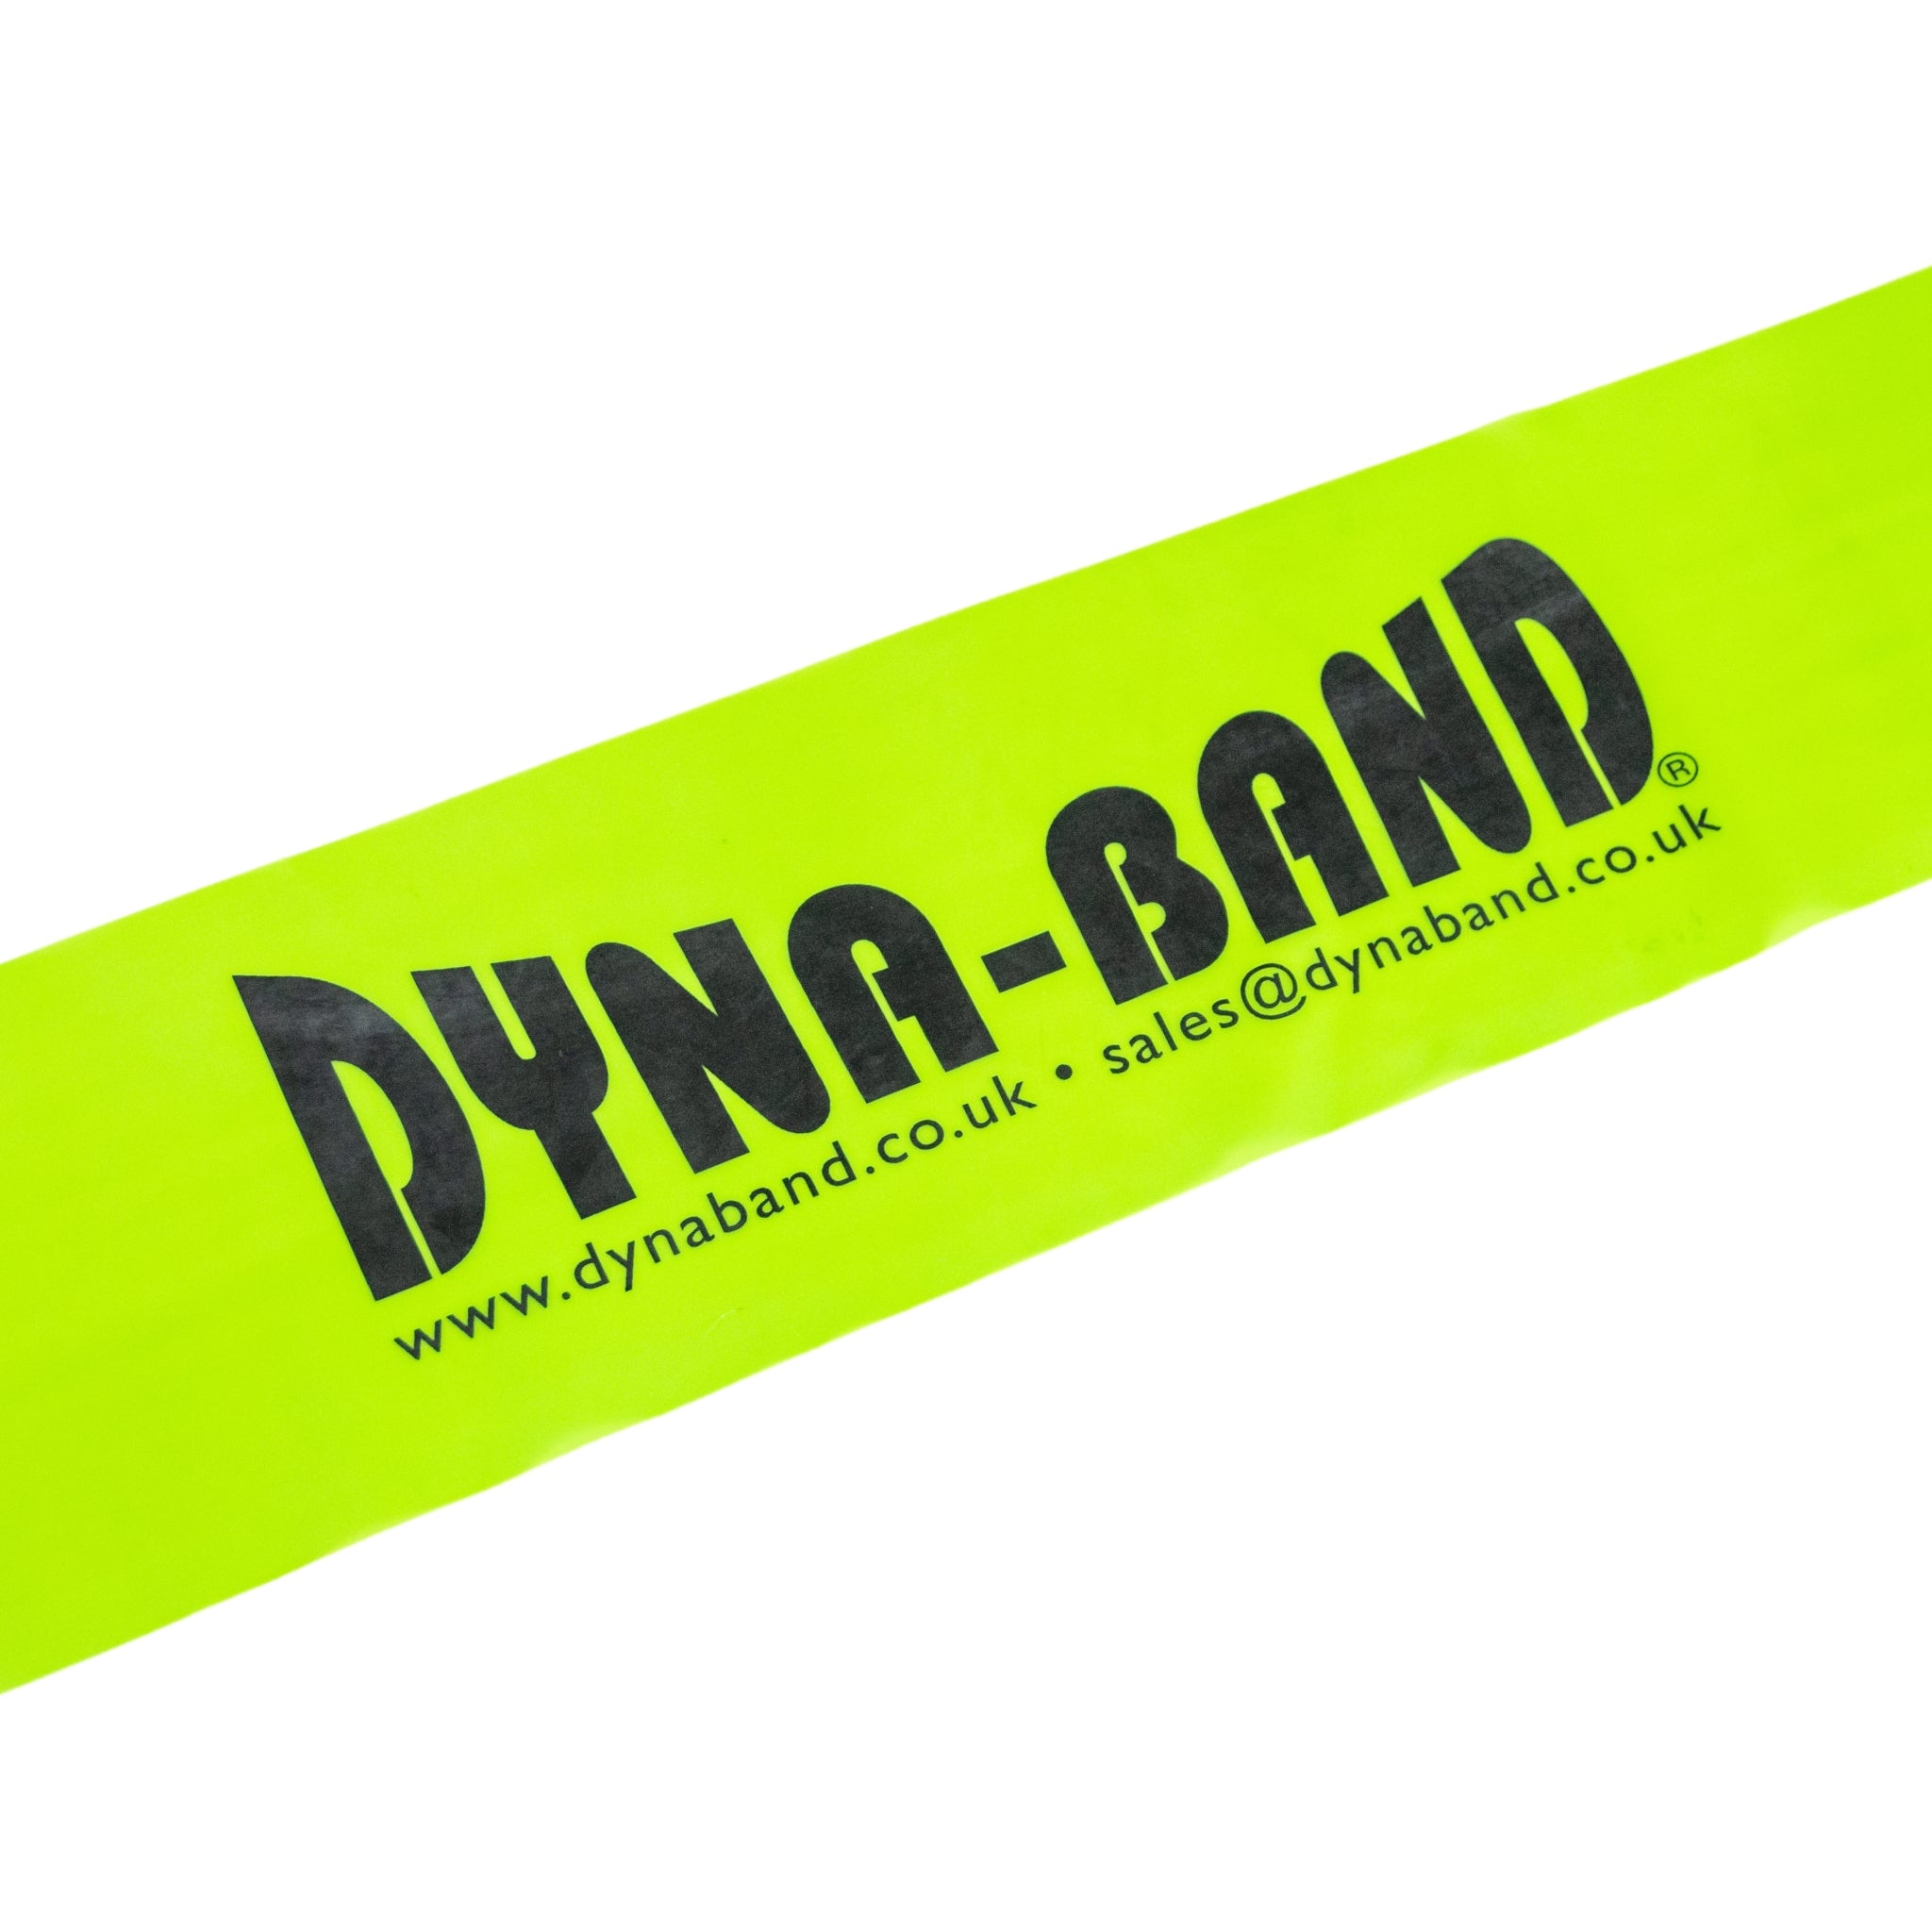 Dyna band resistance exercise band |  medium strength green